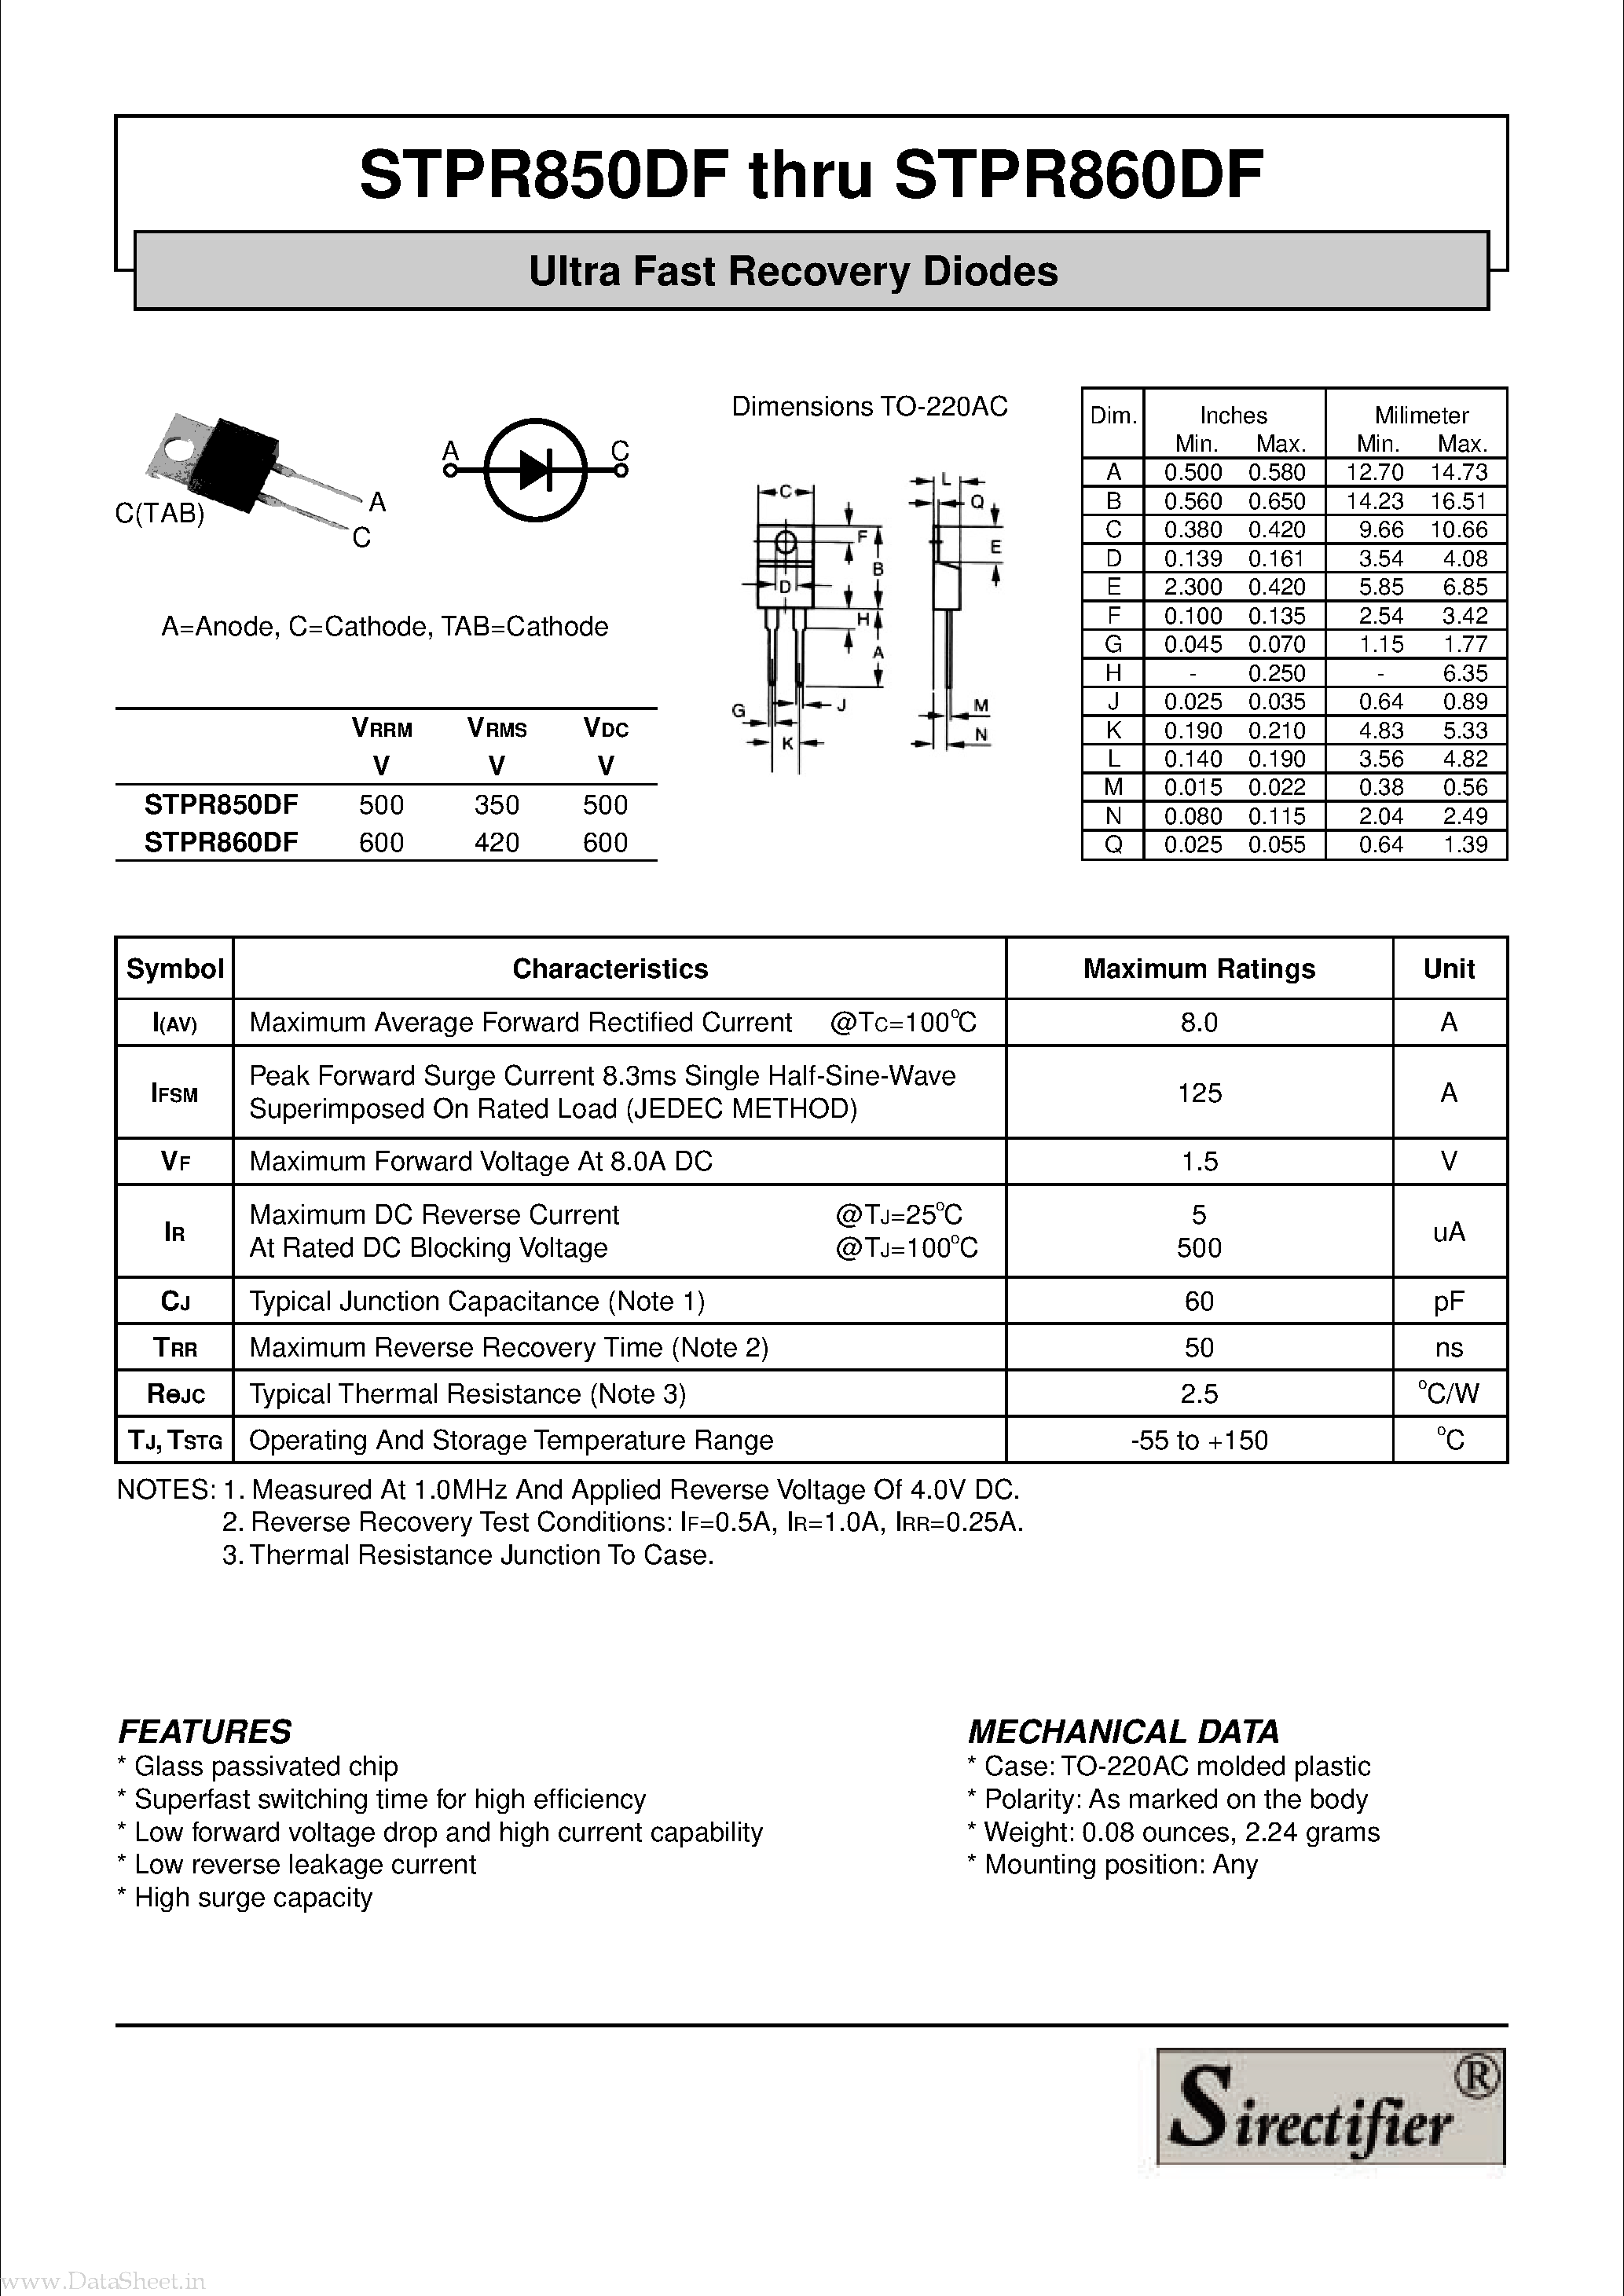 Datasheet STPR850DF - (STPR850DF / STPR860DF) Ultra Fast Recovery Diodes page 1